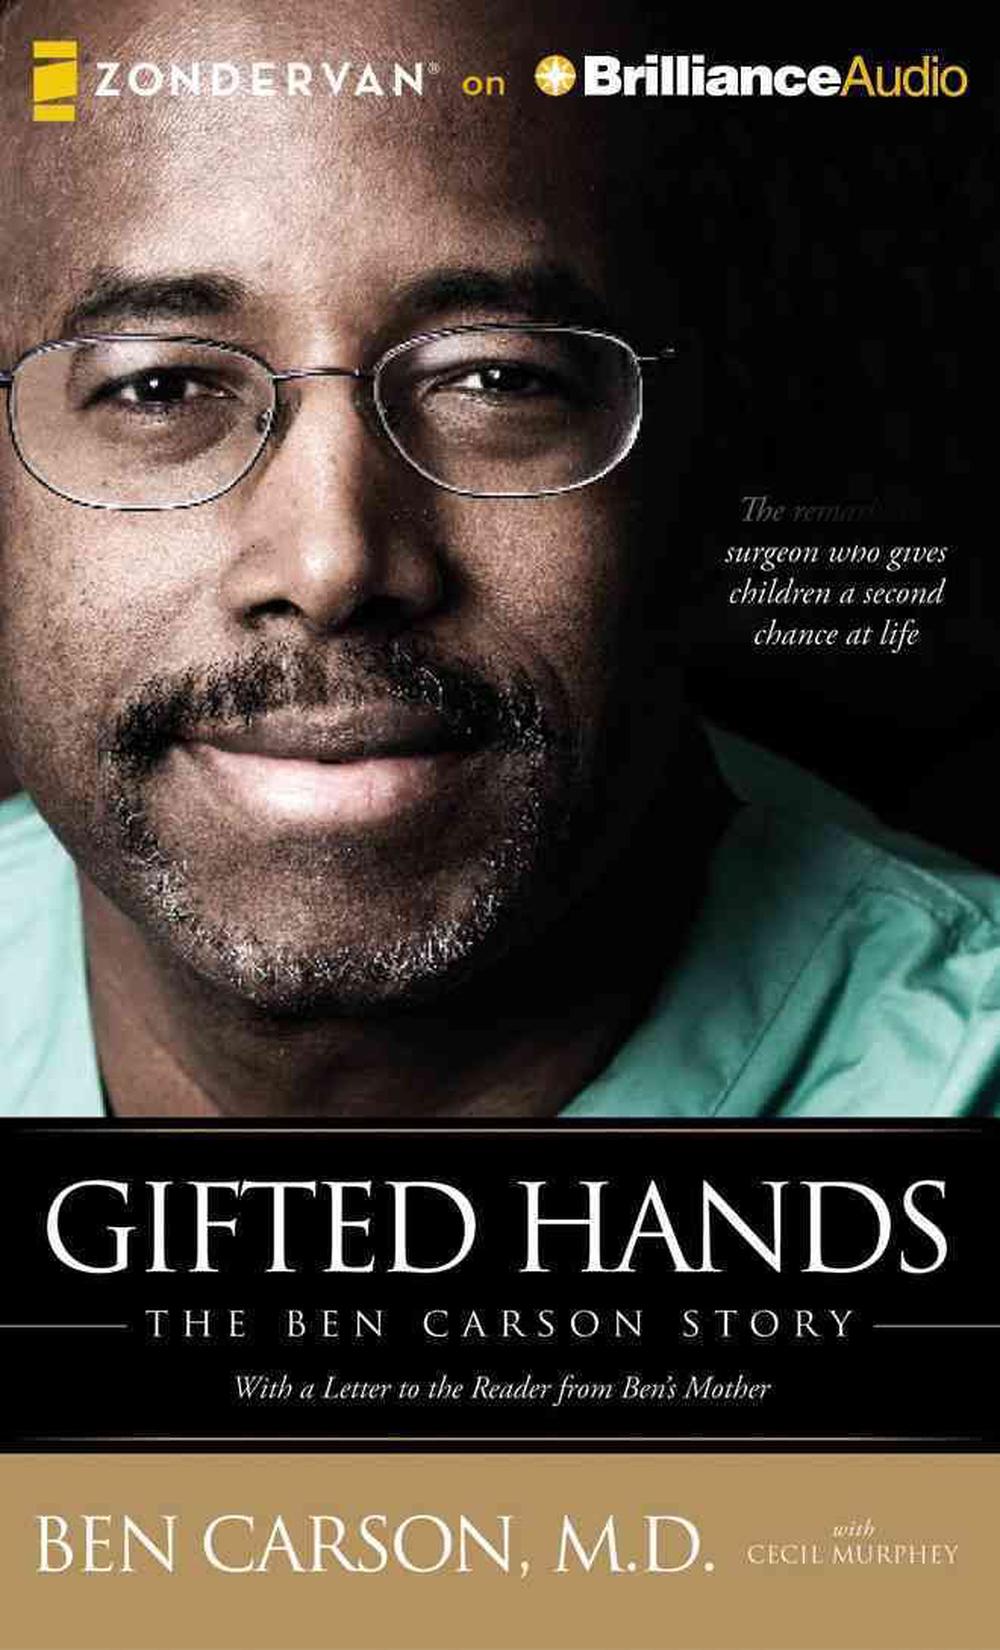 Gifted Hands The Ben Carson Story by Ben Carson (English